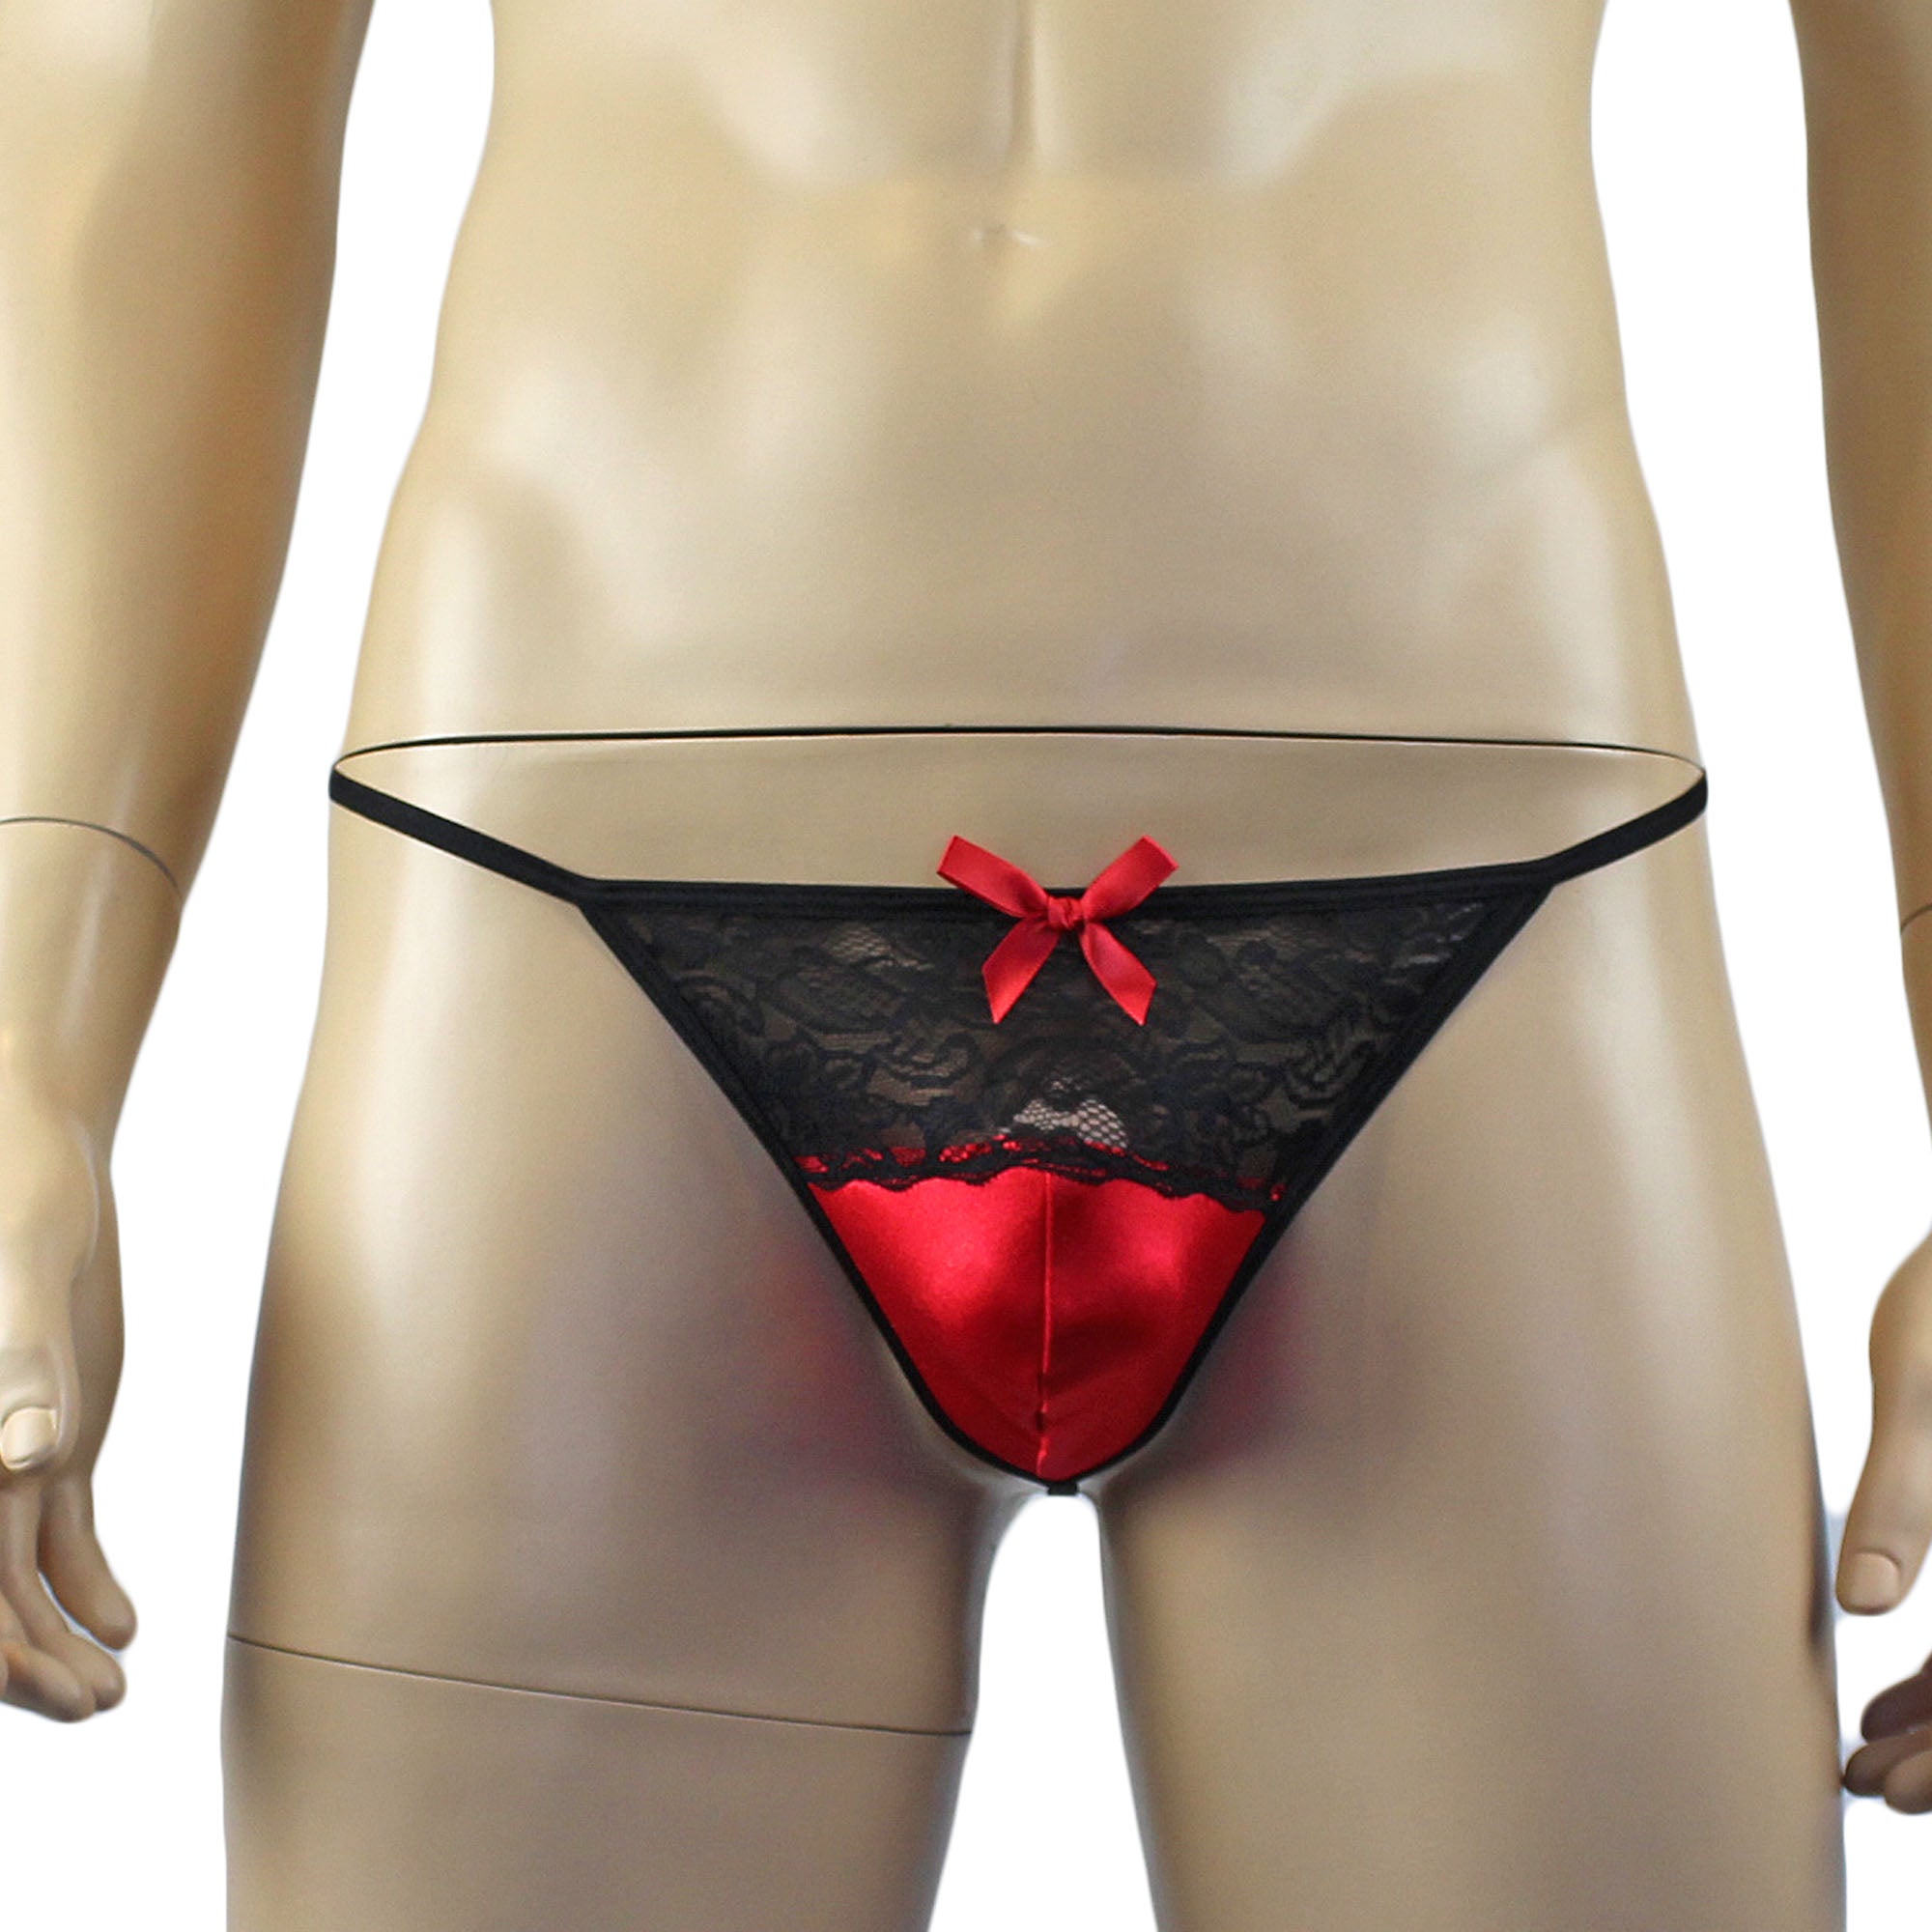 Mens Joanne Lacey G string with Bow Red and Black Lace